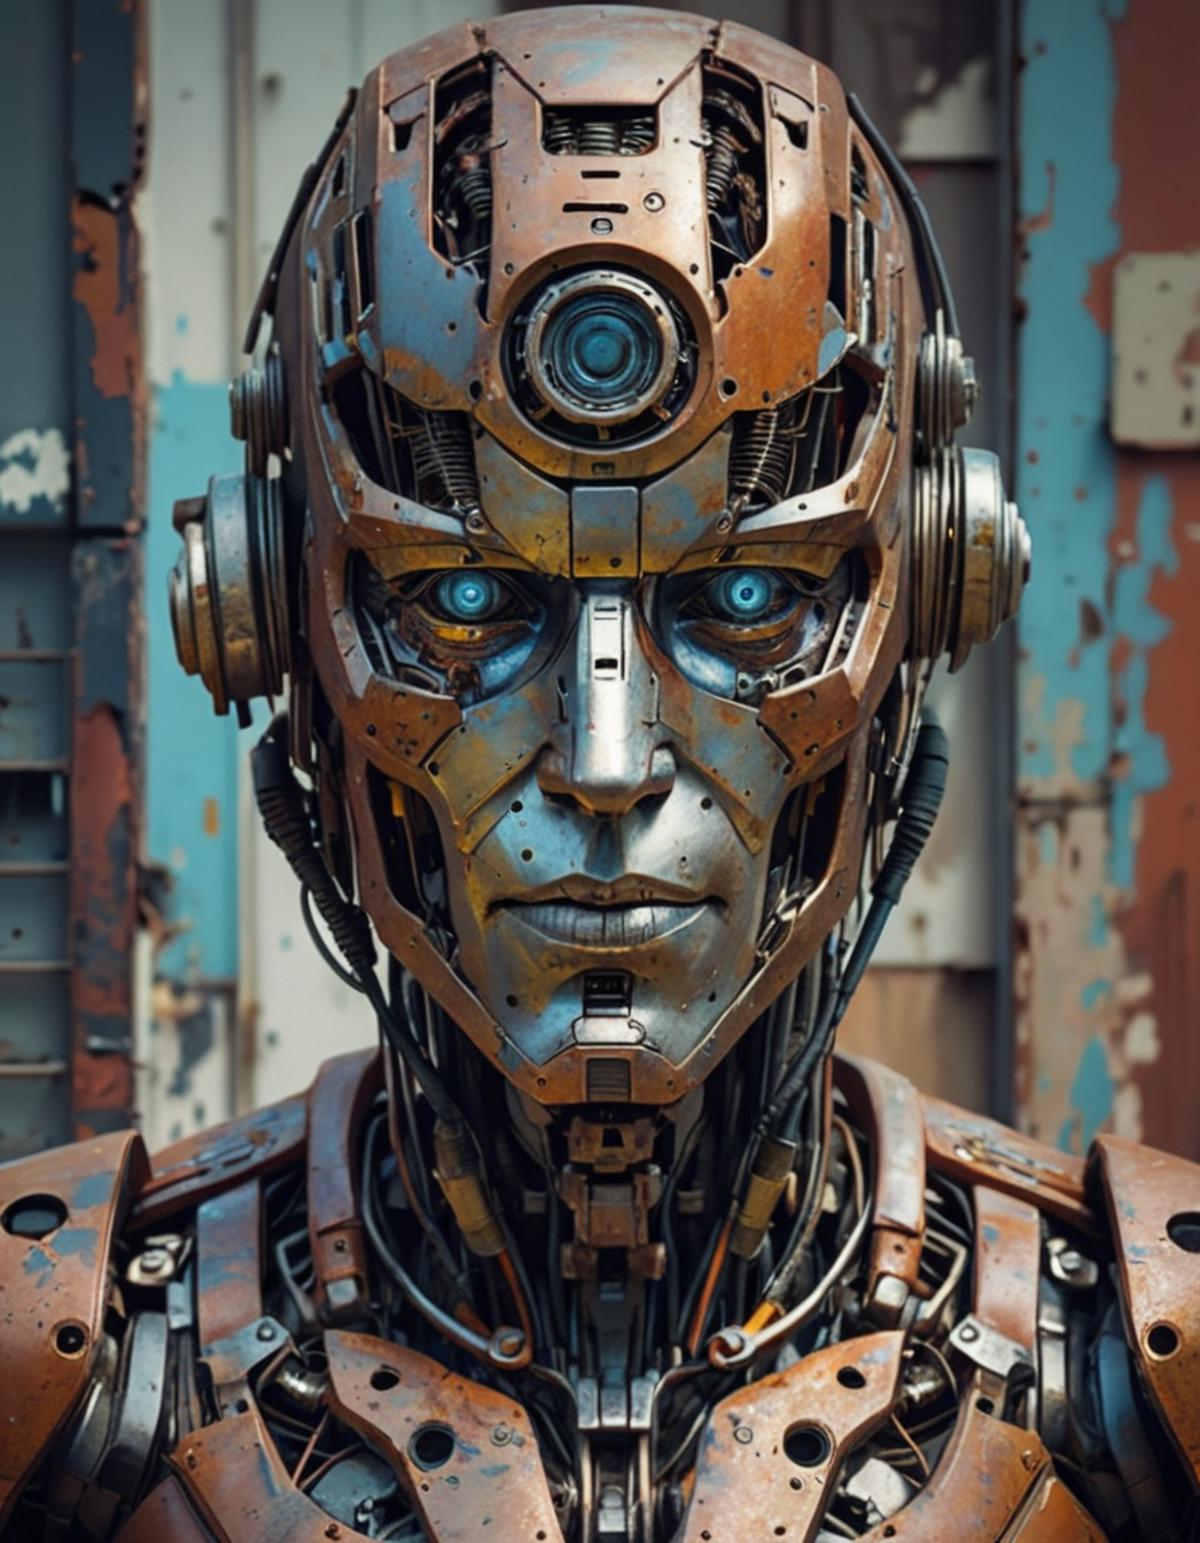 A robot with blue eyes and a metal face.